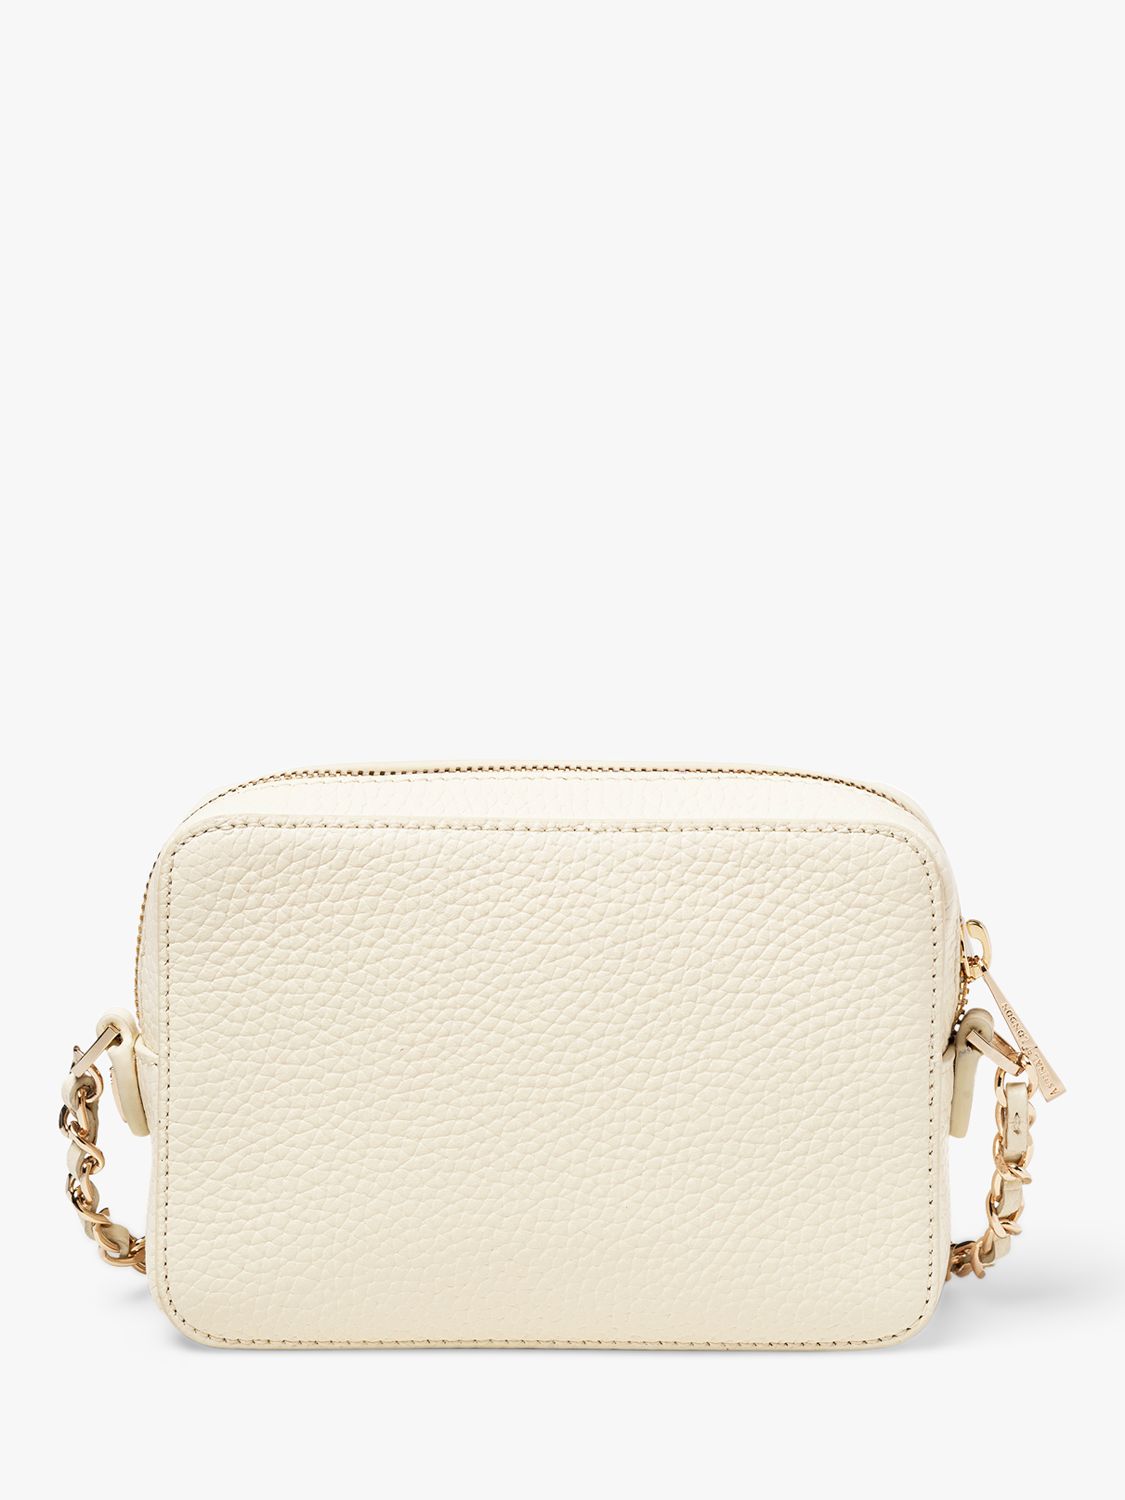 Aspinal of London Milly Pebble Leather Cross Body Bag, Ivory at John ...